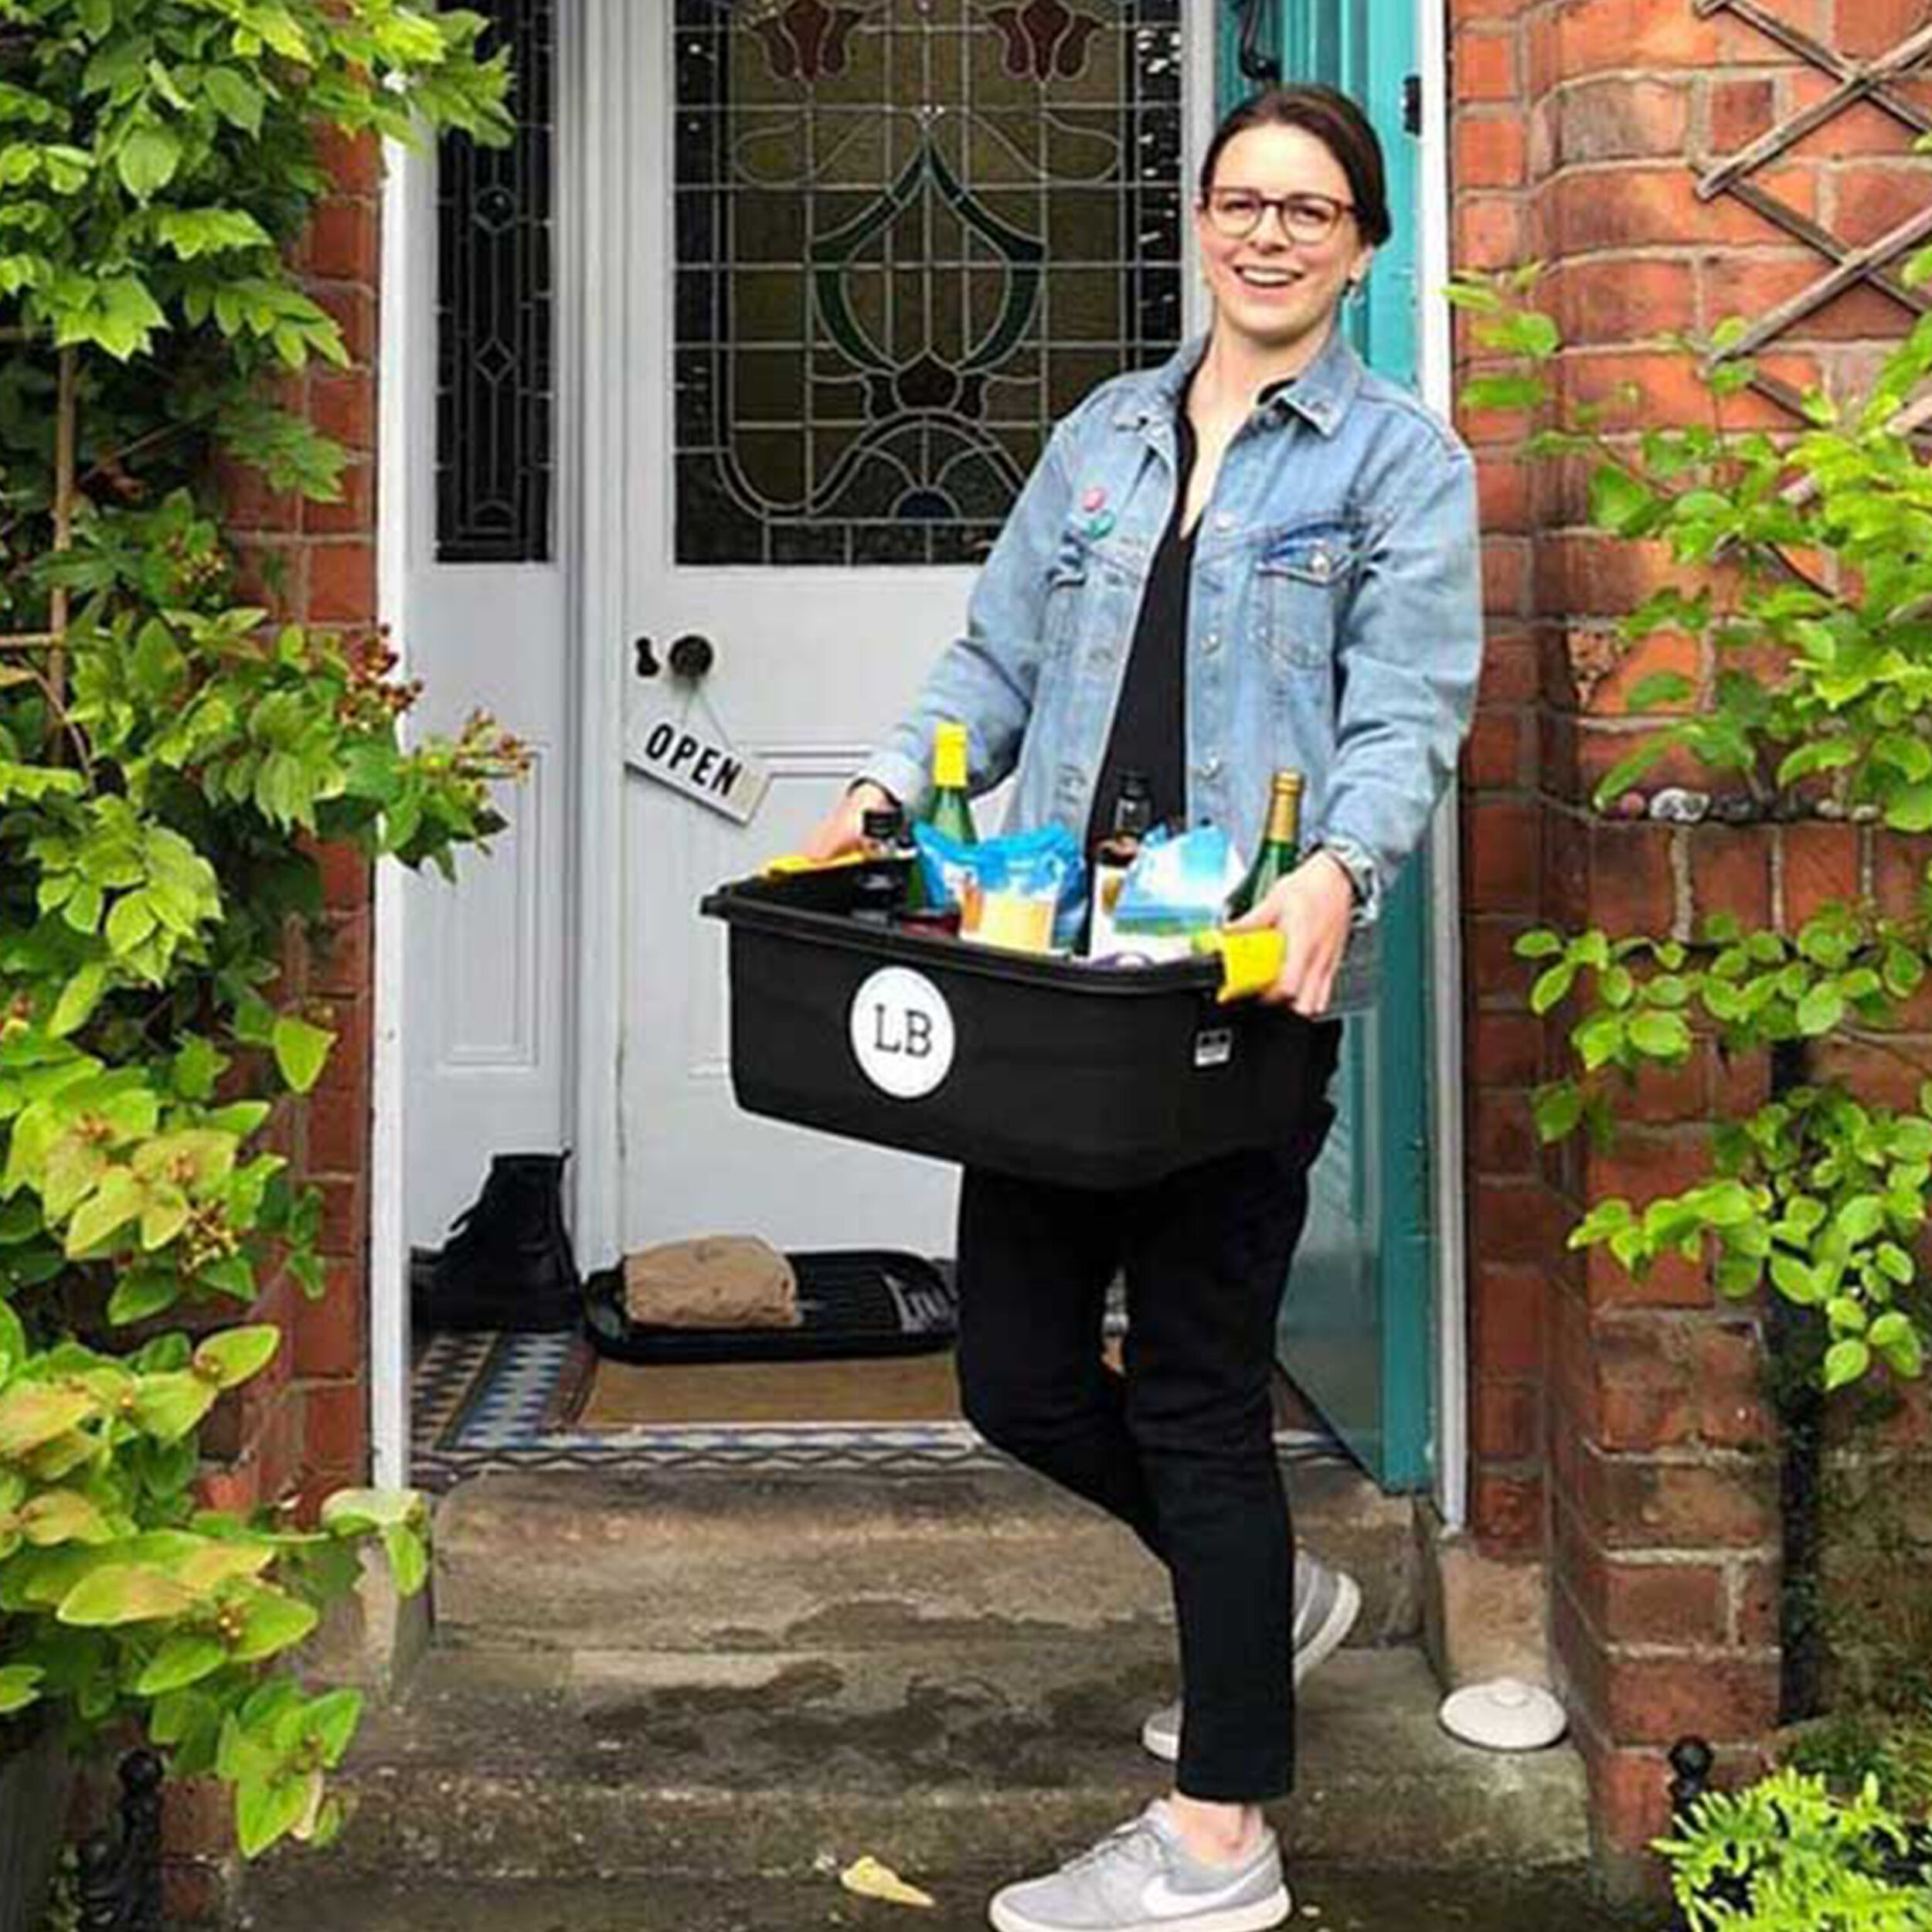 Local Box: The Start-Up Bringing NI Food To Your Doorstep